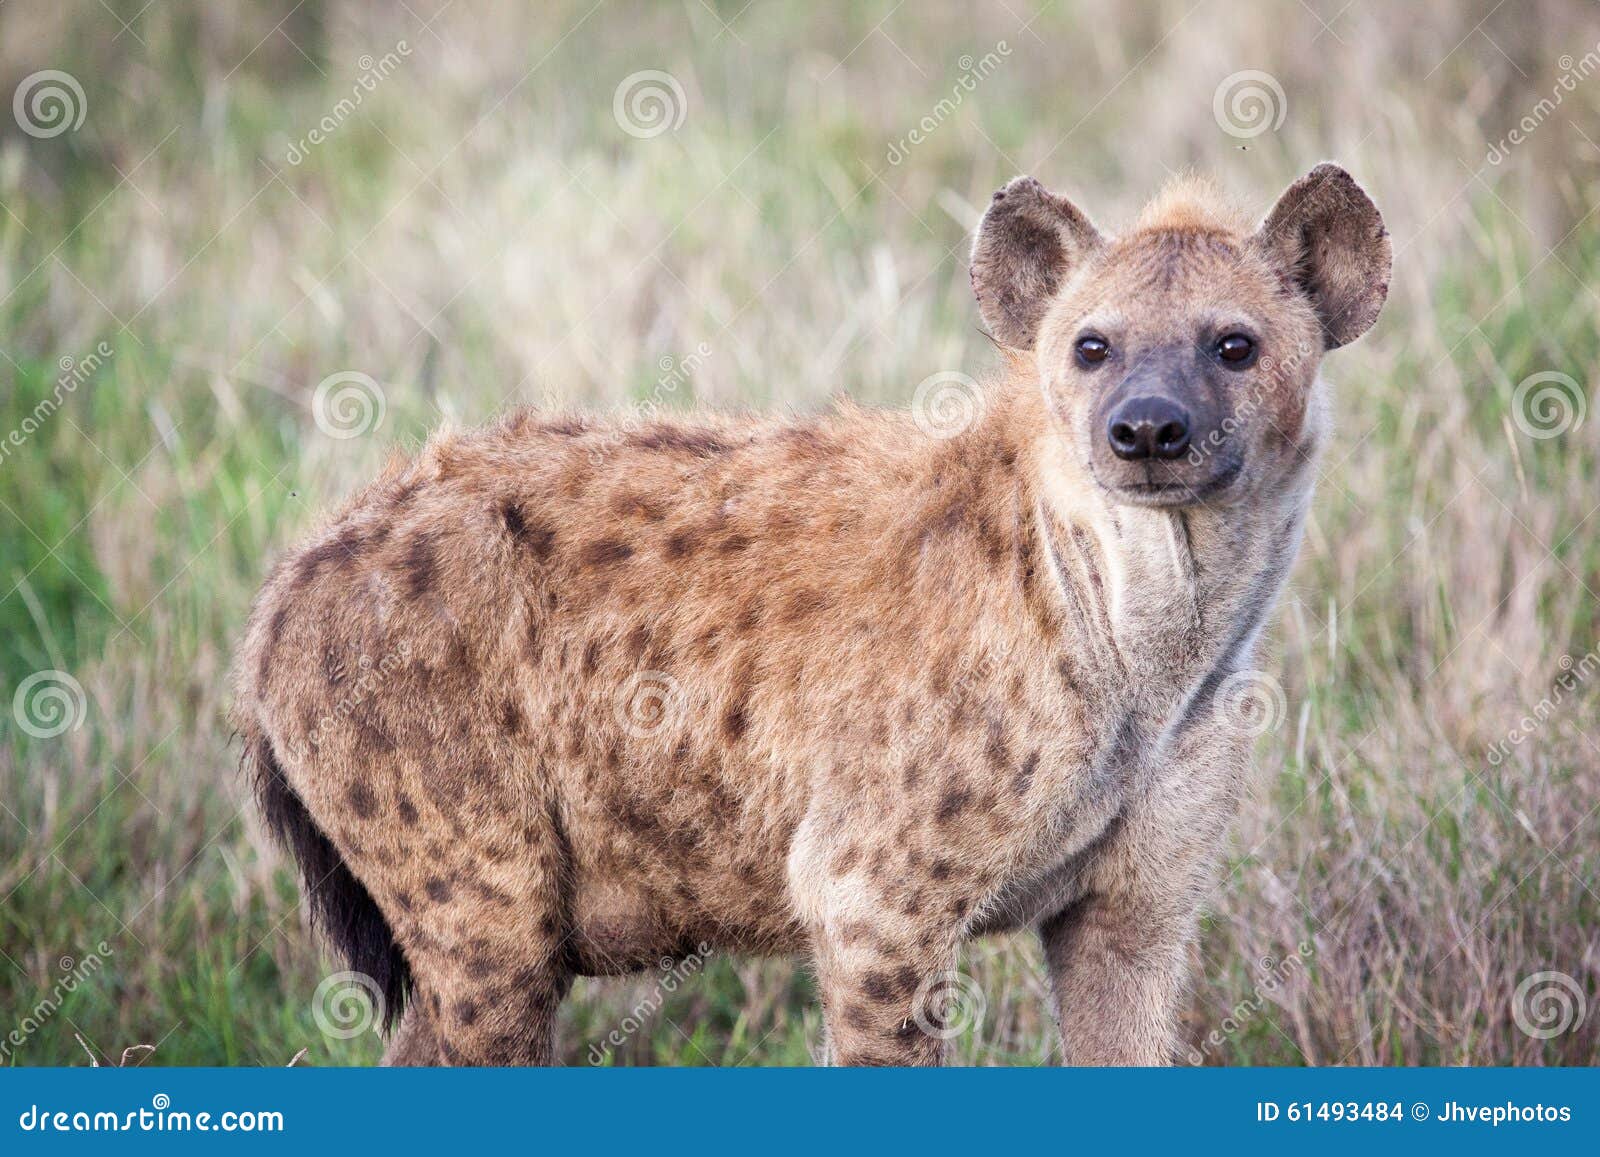 spotted hyena in serengeti national park